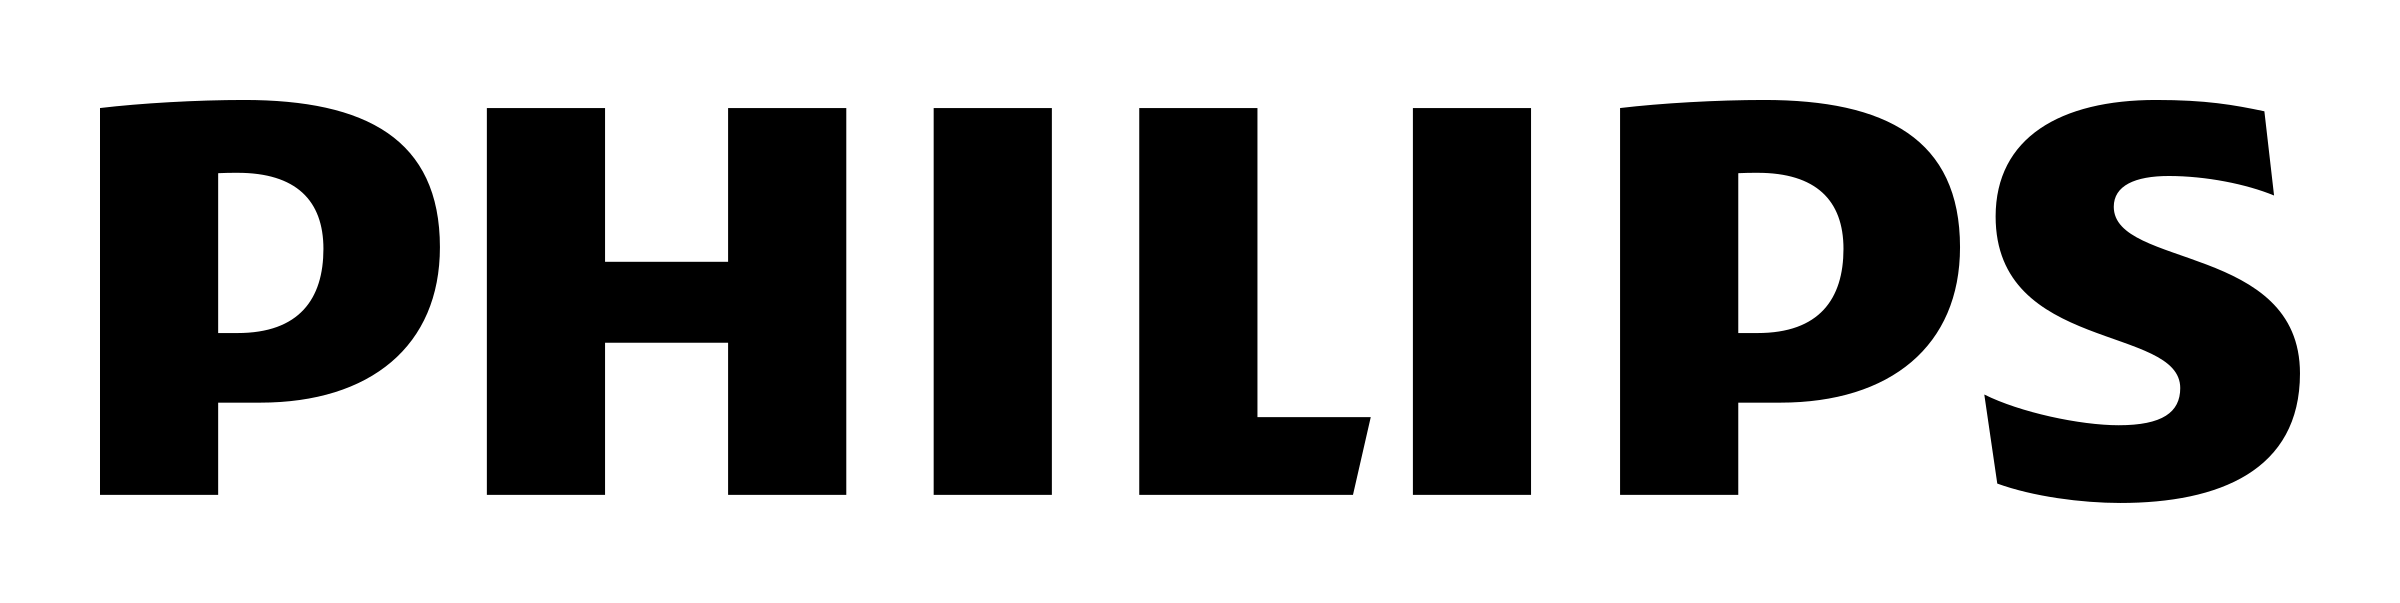 philips-logo-black-and-white.png